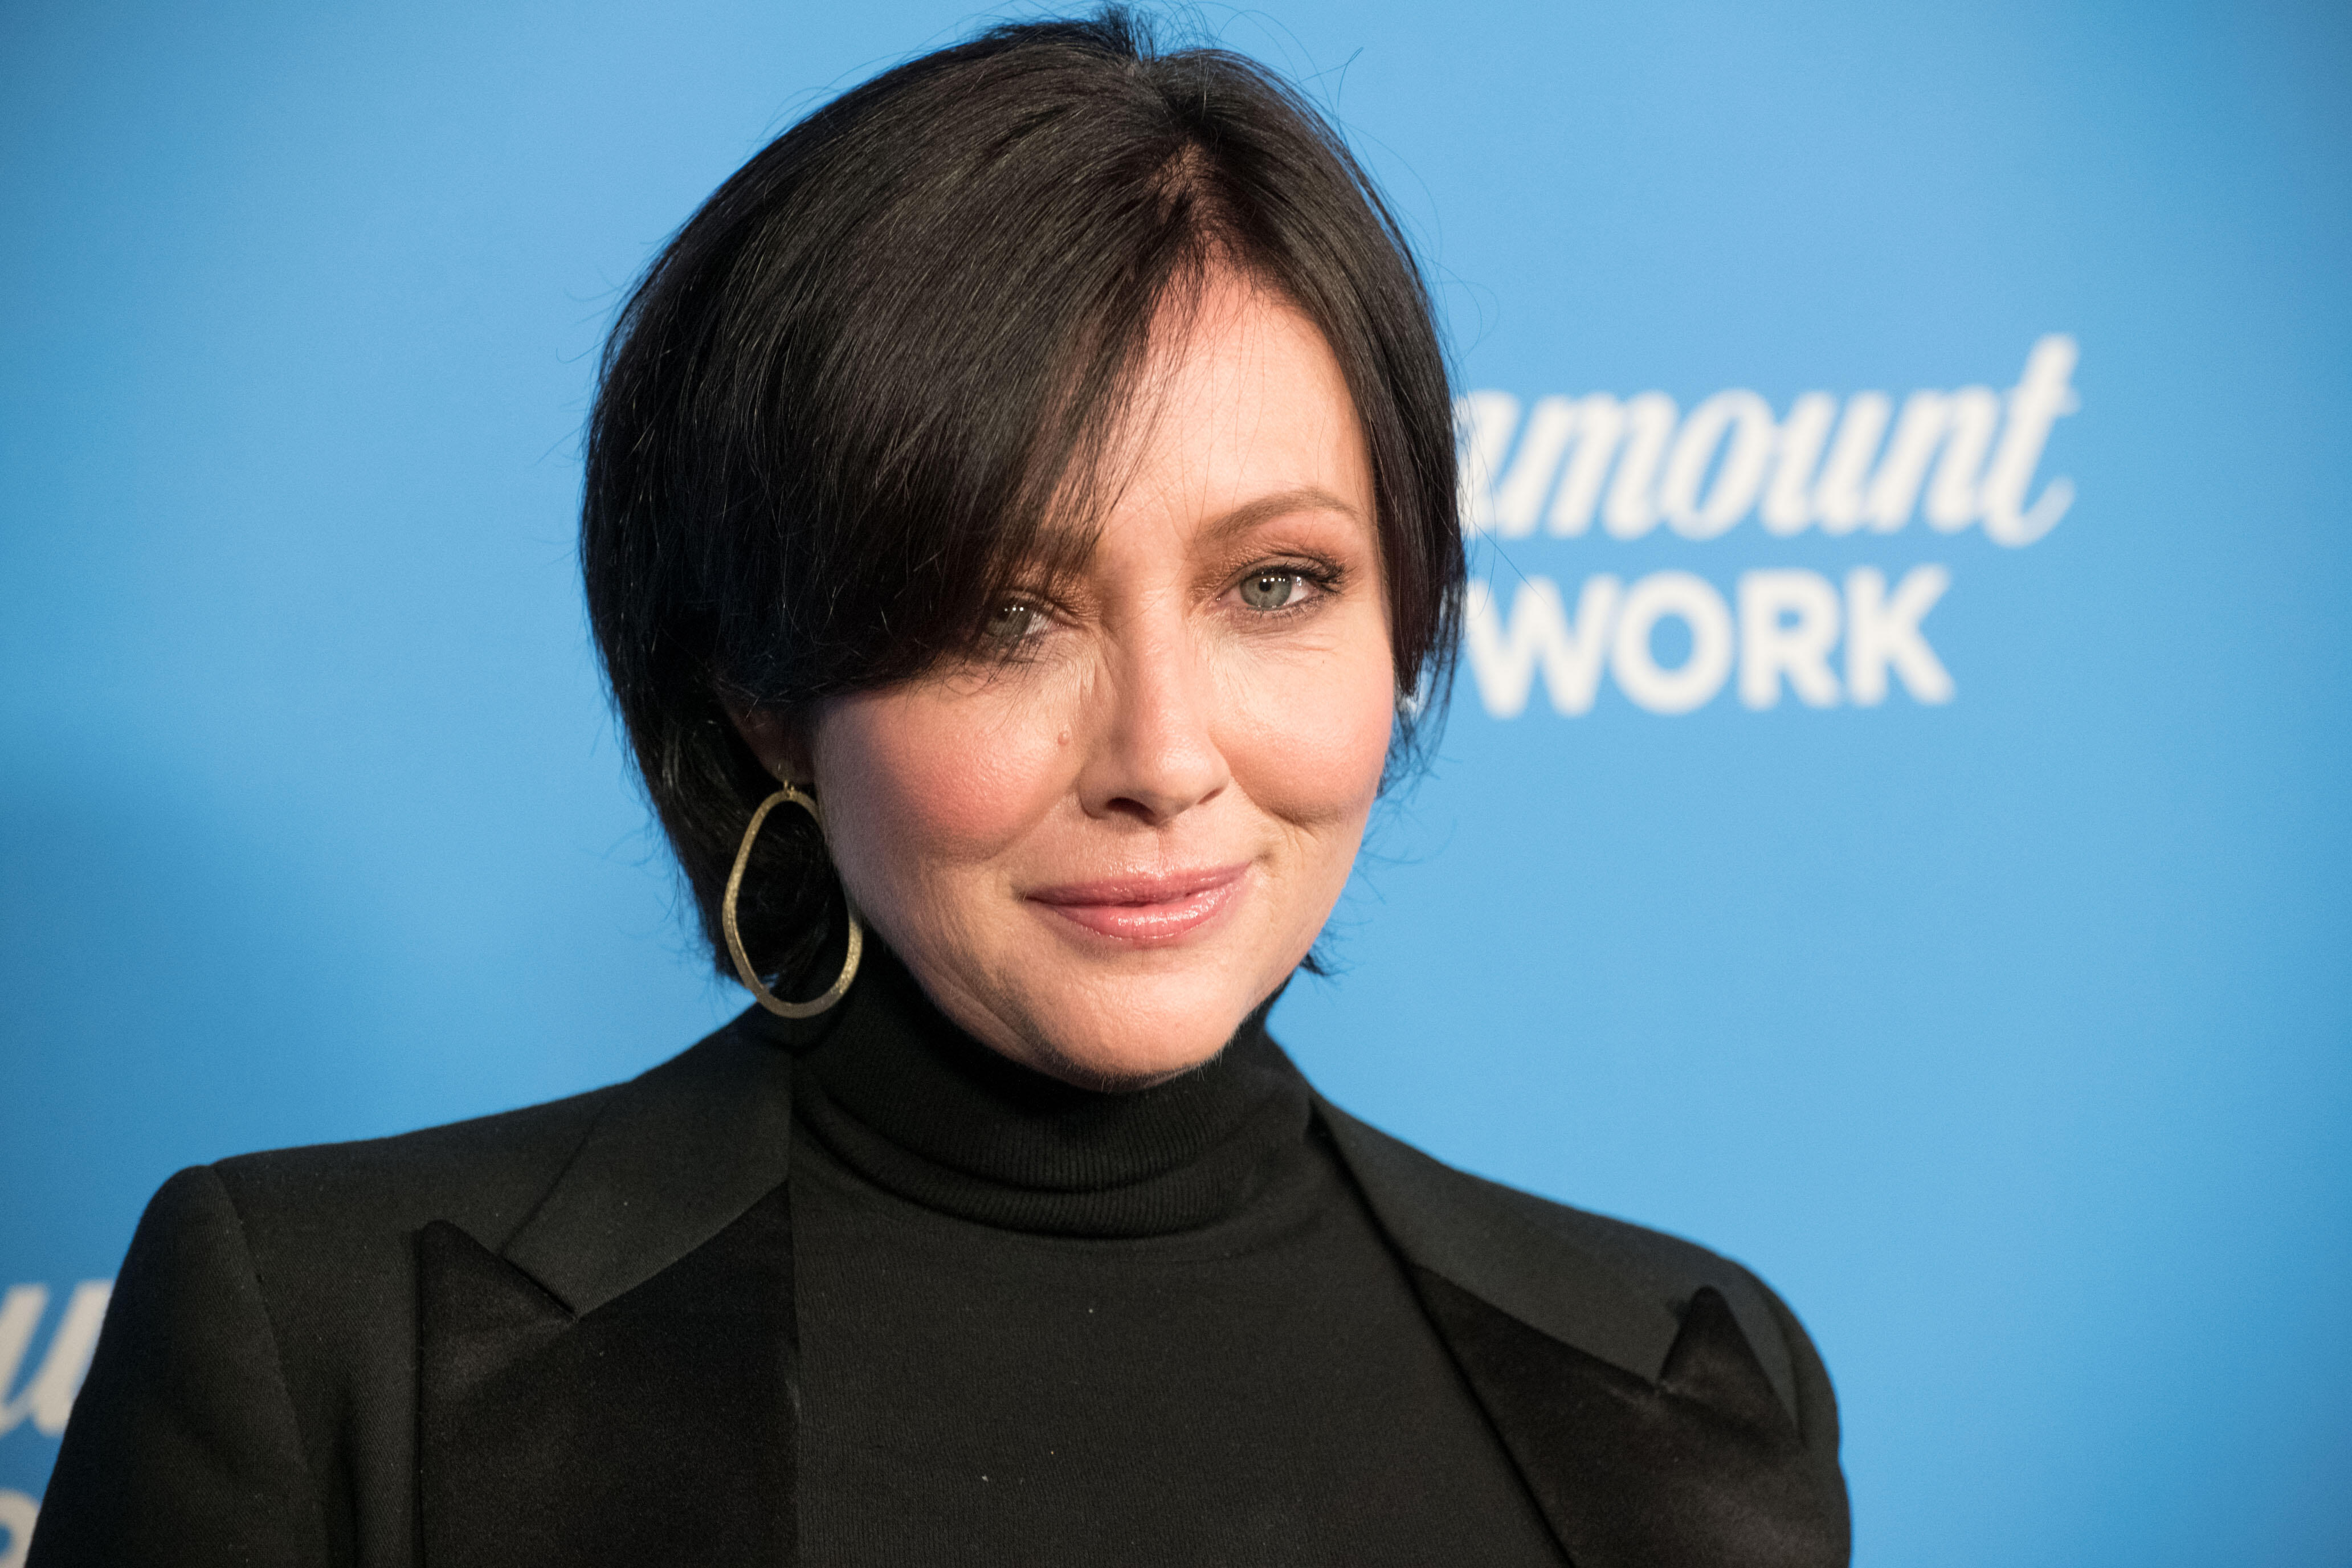 Shannen Doherty Shares Health Update Amid Battle With Stage 4 Cancer